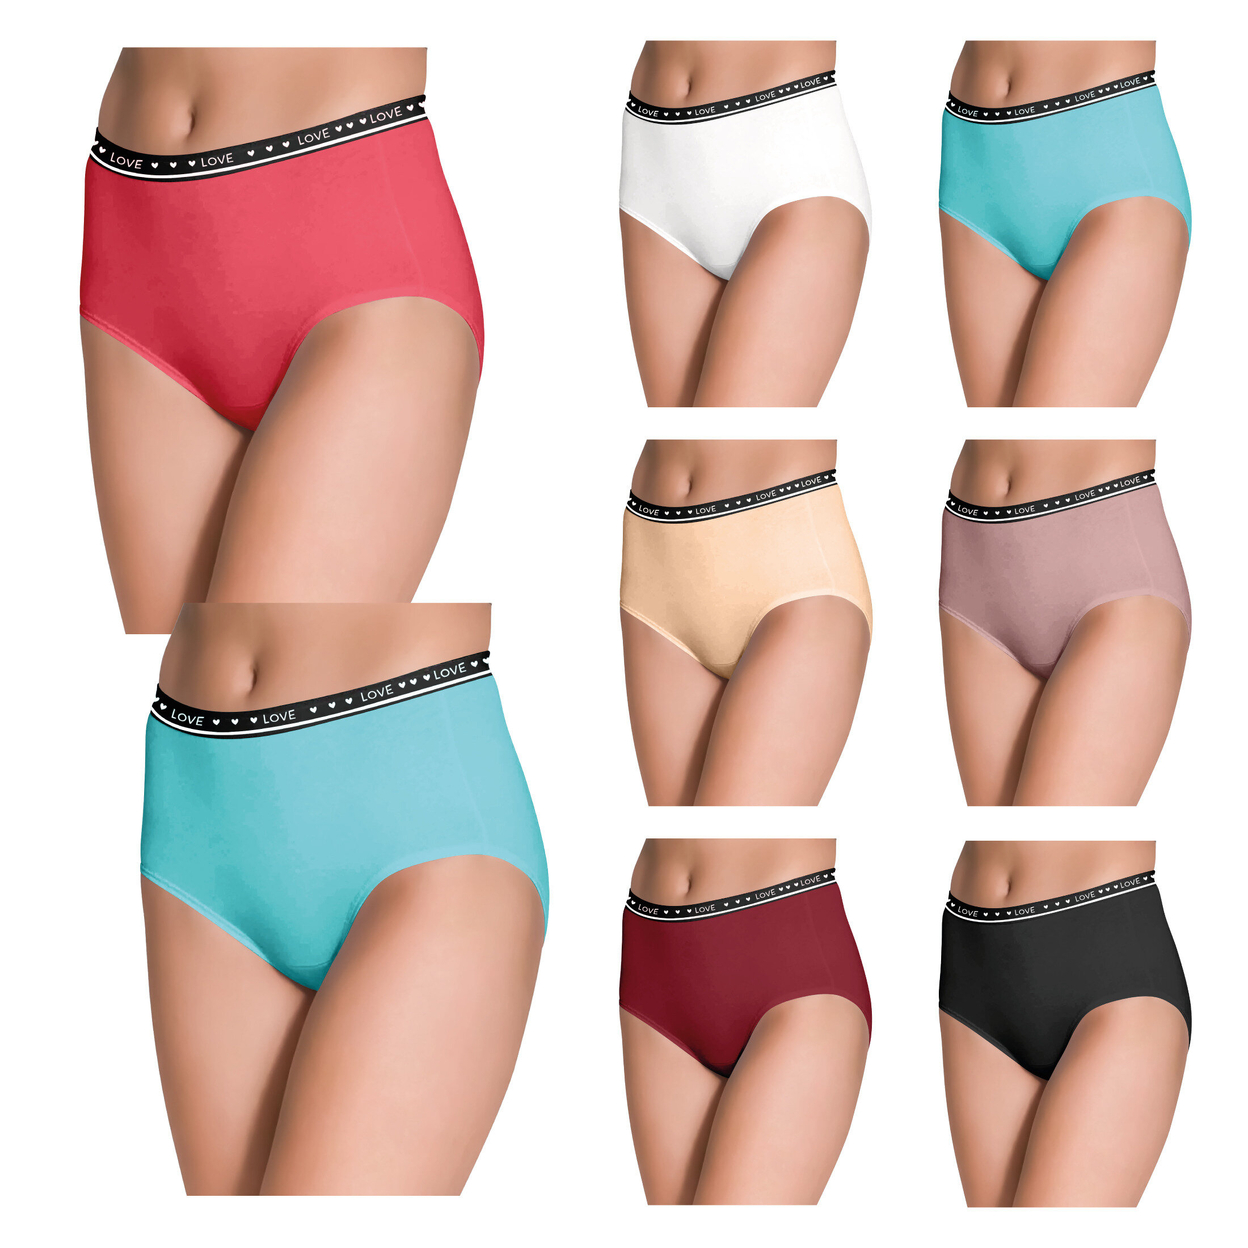 Multi-Pack: Women's Ultra Soft Moisture Wicking Panties Cotton Perfect Fit Underwear (Plus Sizes Available) - 6-Pack, Xx-large